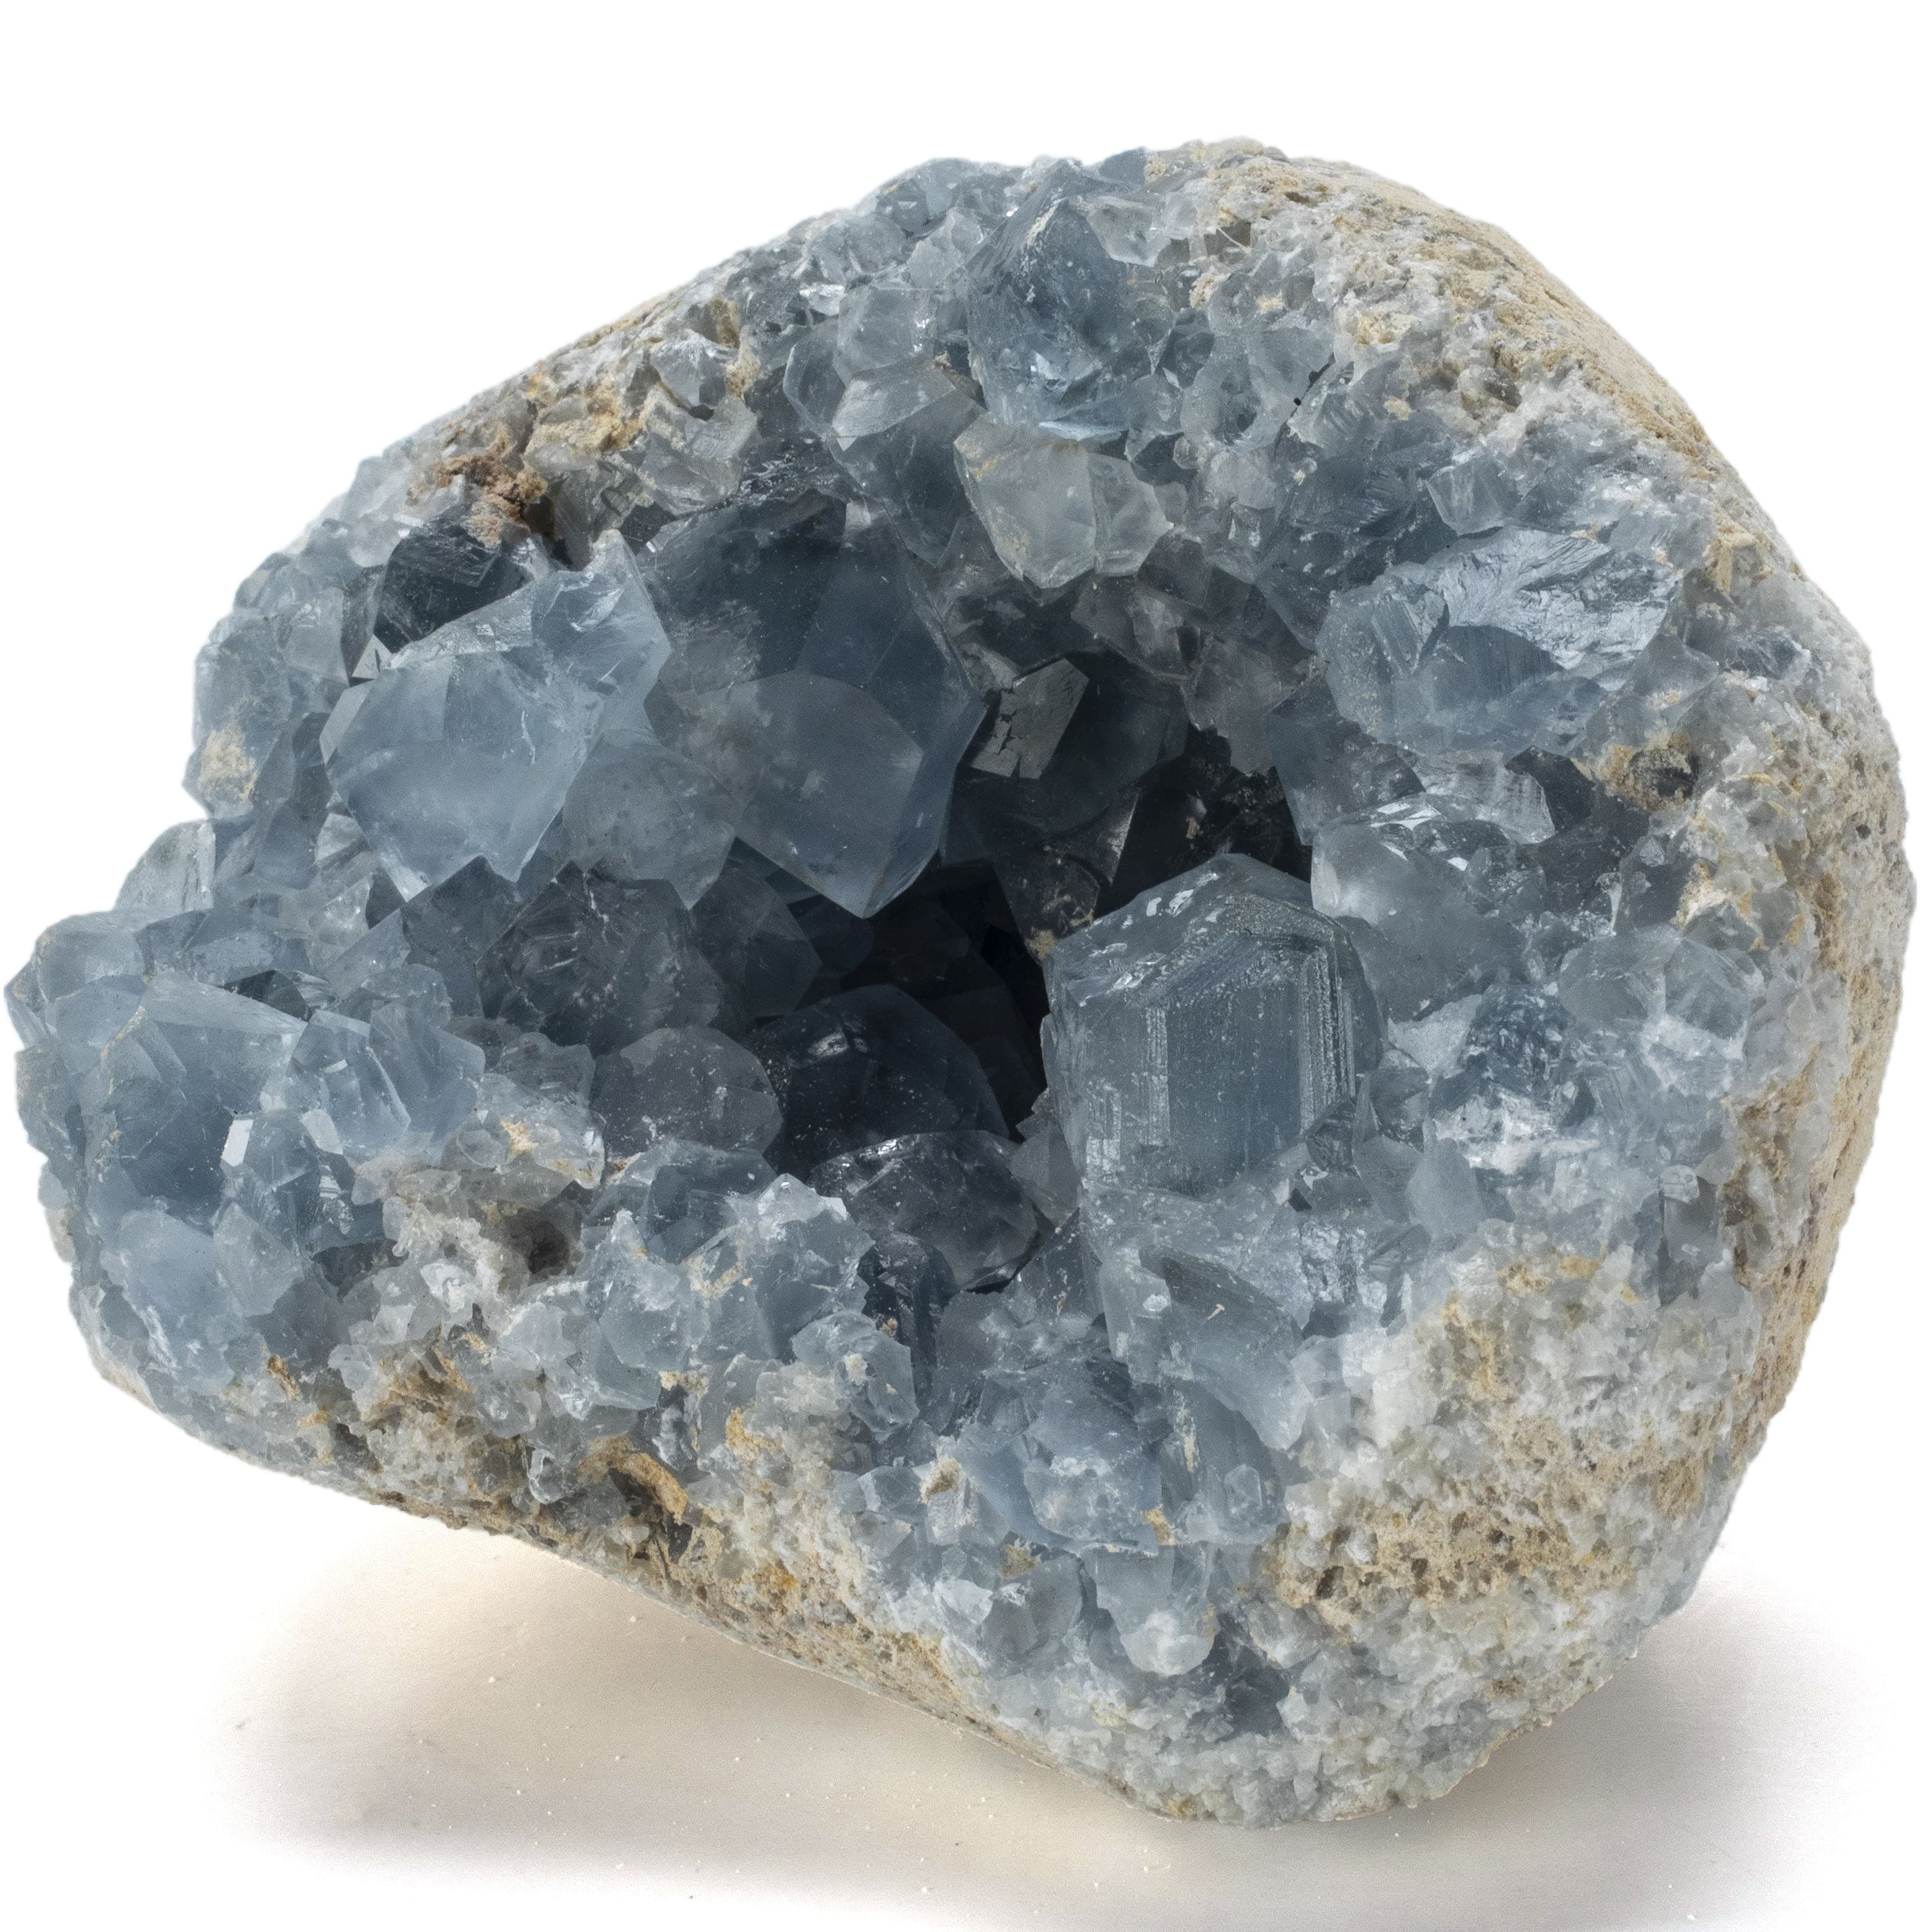 Discover the Healing Properties and Beauty of Celestite Crystal Geodes: A Guide for Collectors and Energy Workers